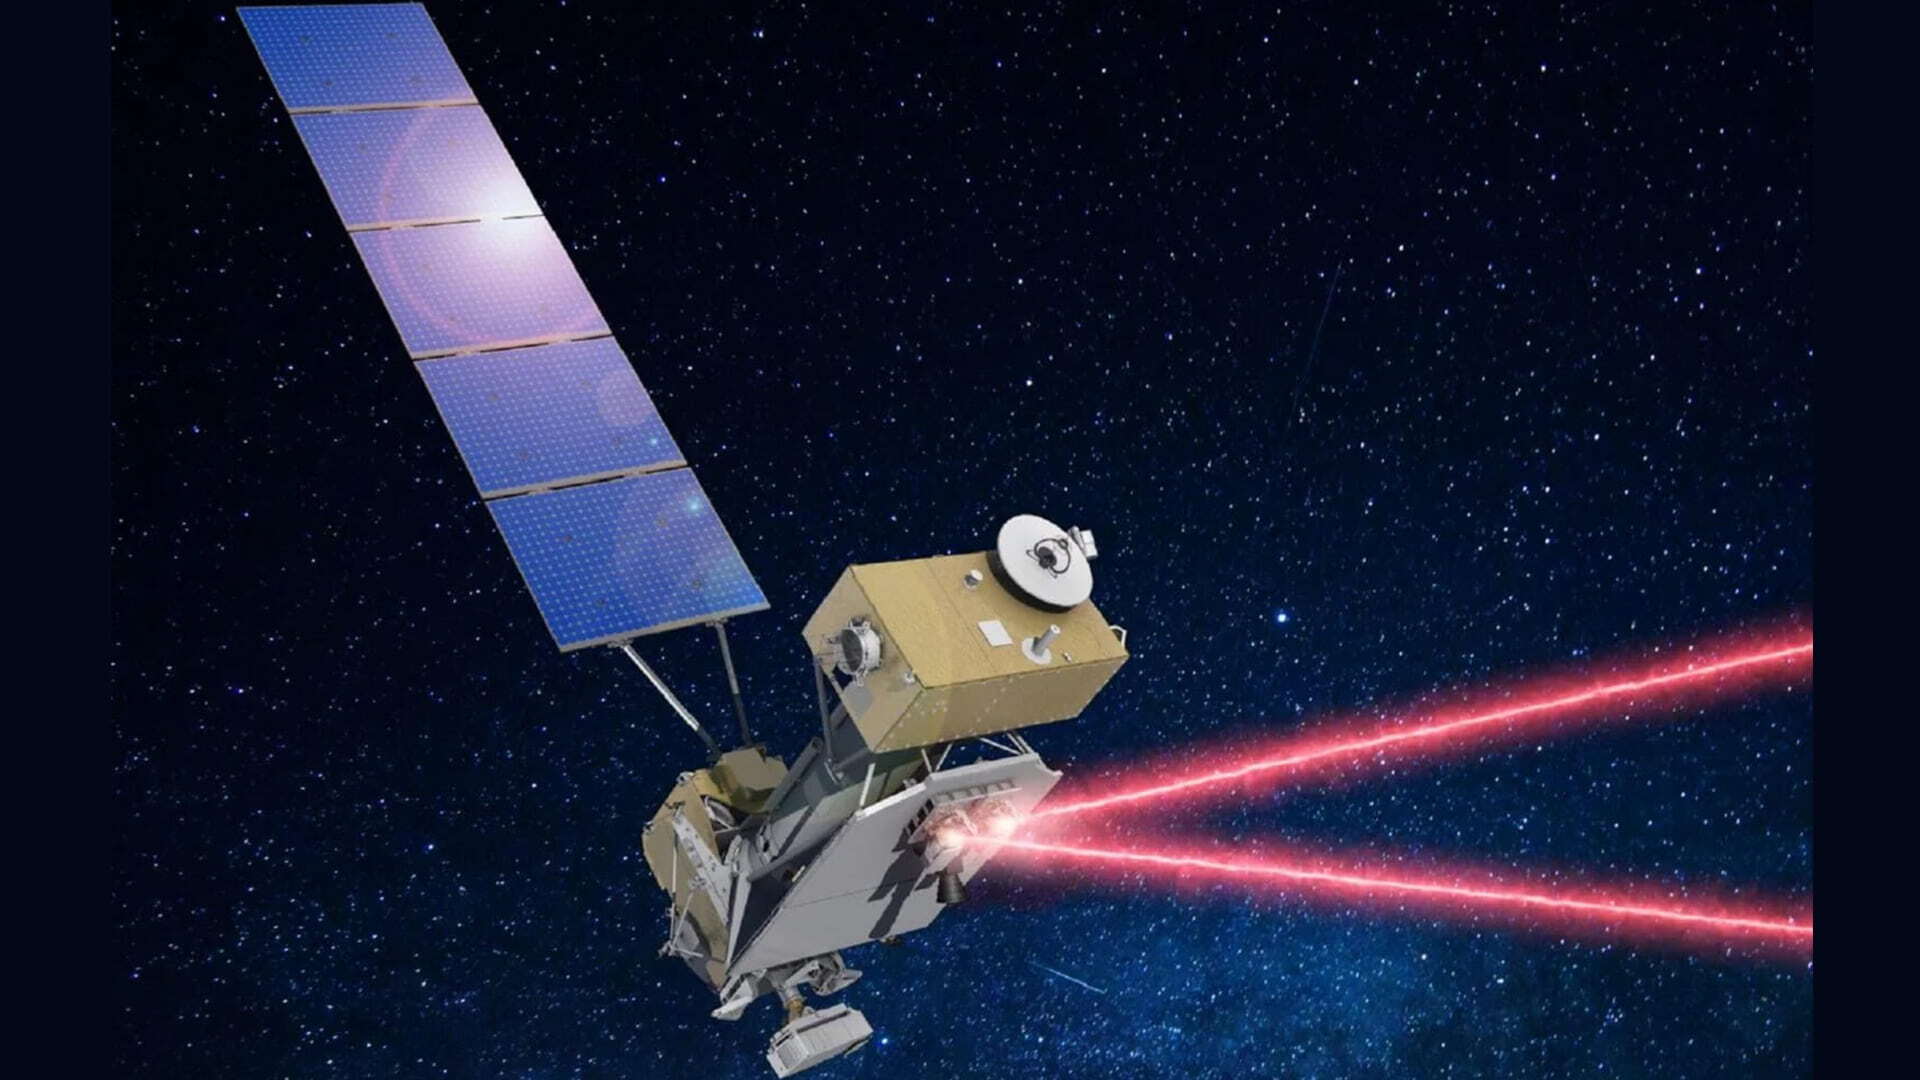 Two-way End-to-End Laser Communications, NASA laser communications relay system, Laser communication technology, Space-based laser data, ILLUMA-T